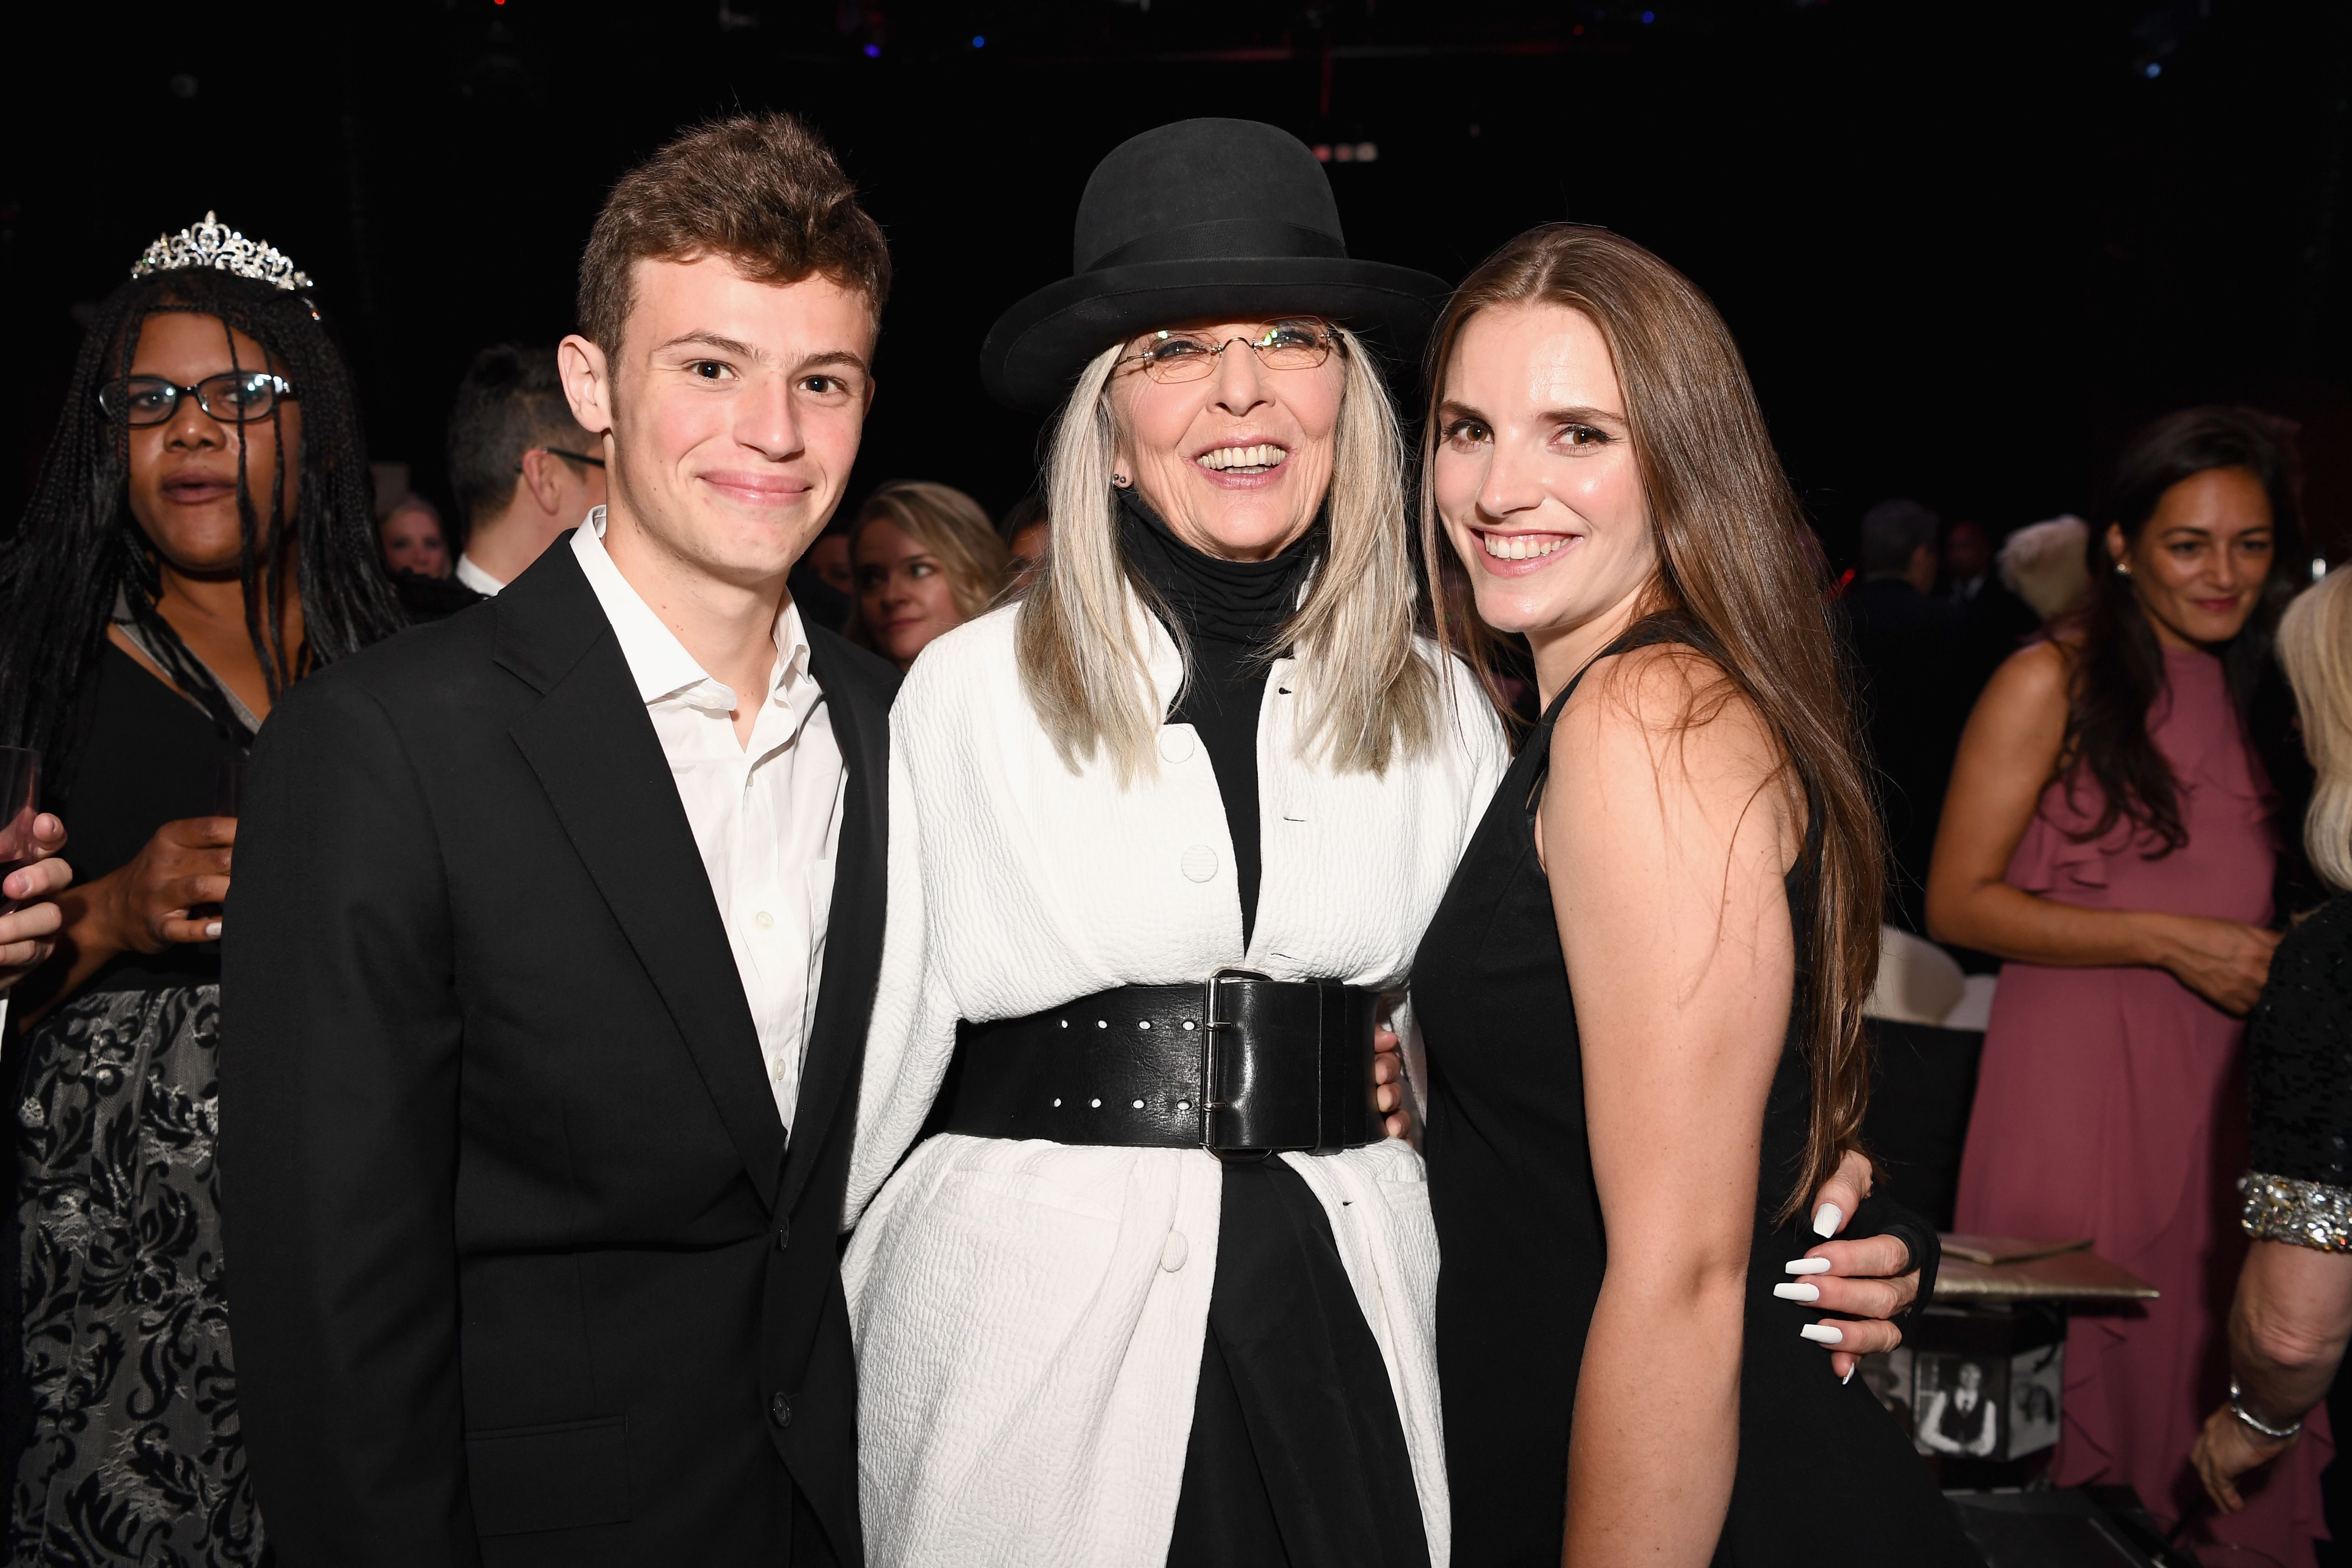  Diane Keaton with daughter Dexter and son Duke at the after party for American Film Institute's 45th Life Achievement Award Gala Tribute to Diane Keaton in 2017 in Hollywood | Source: Getty Images